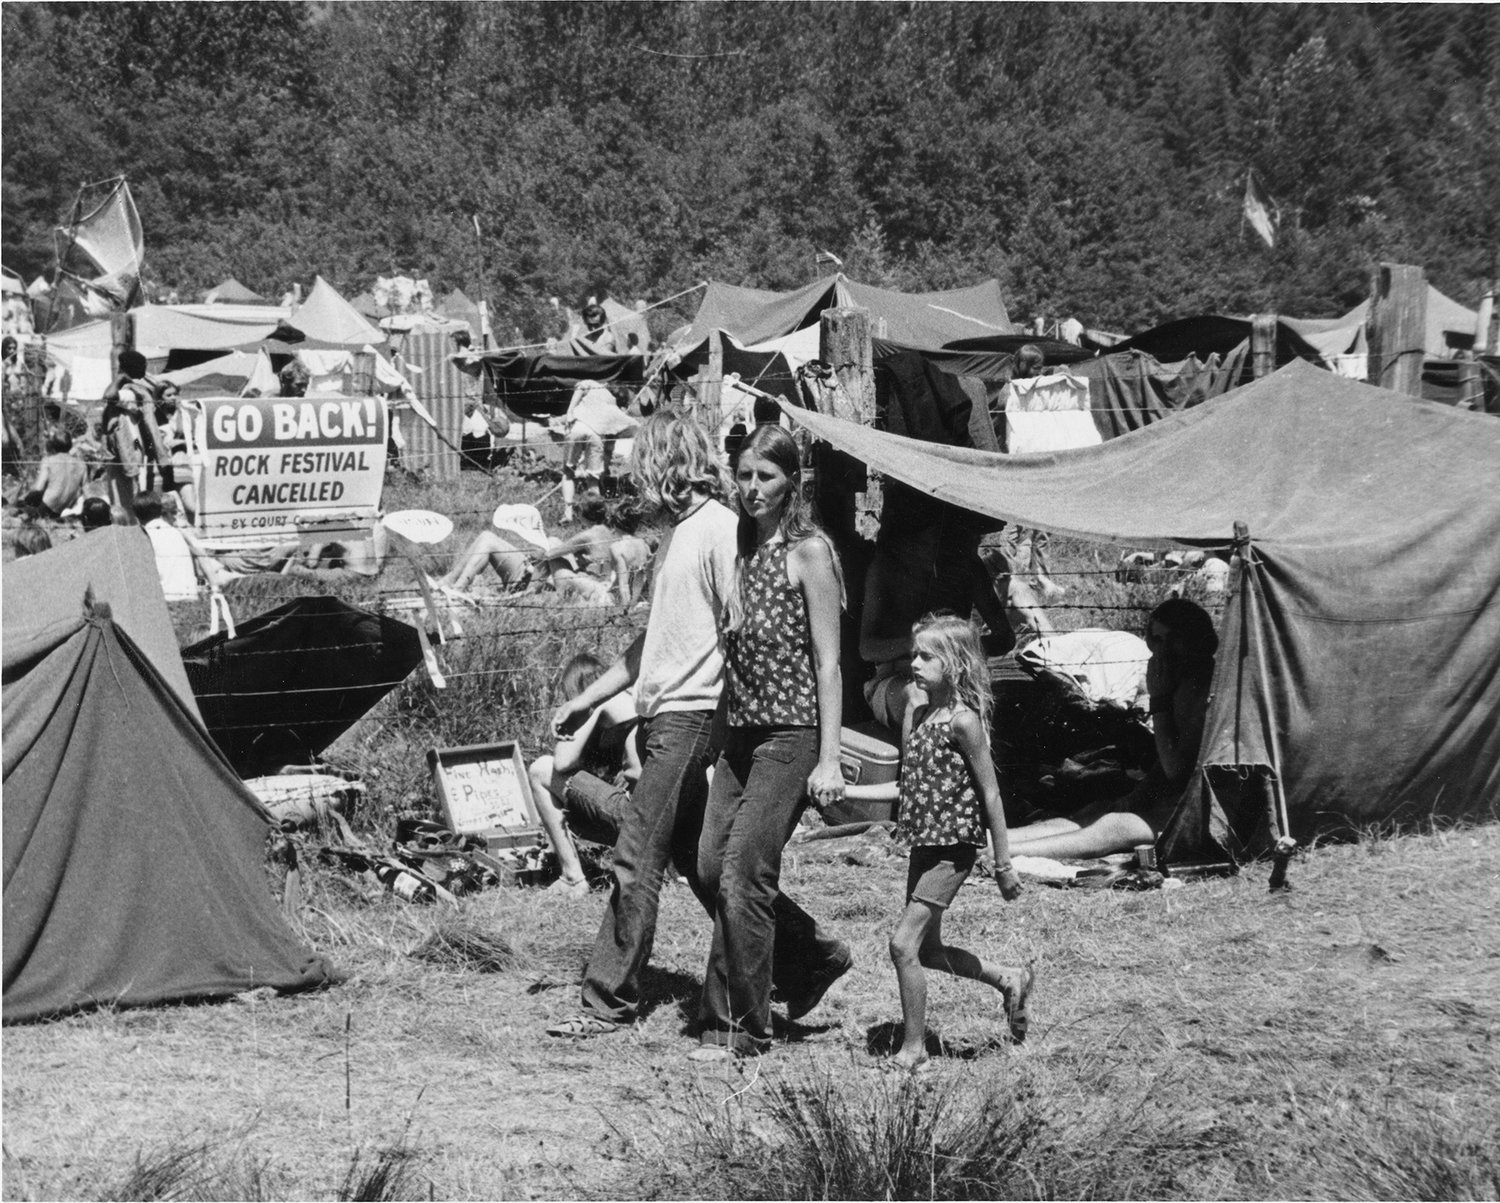 A family walks through the Tenino Sky River Rock Festival and Lighter Than Air Fair, which took place on Labor Day weekend in 1969.